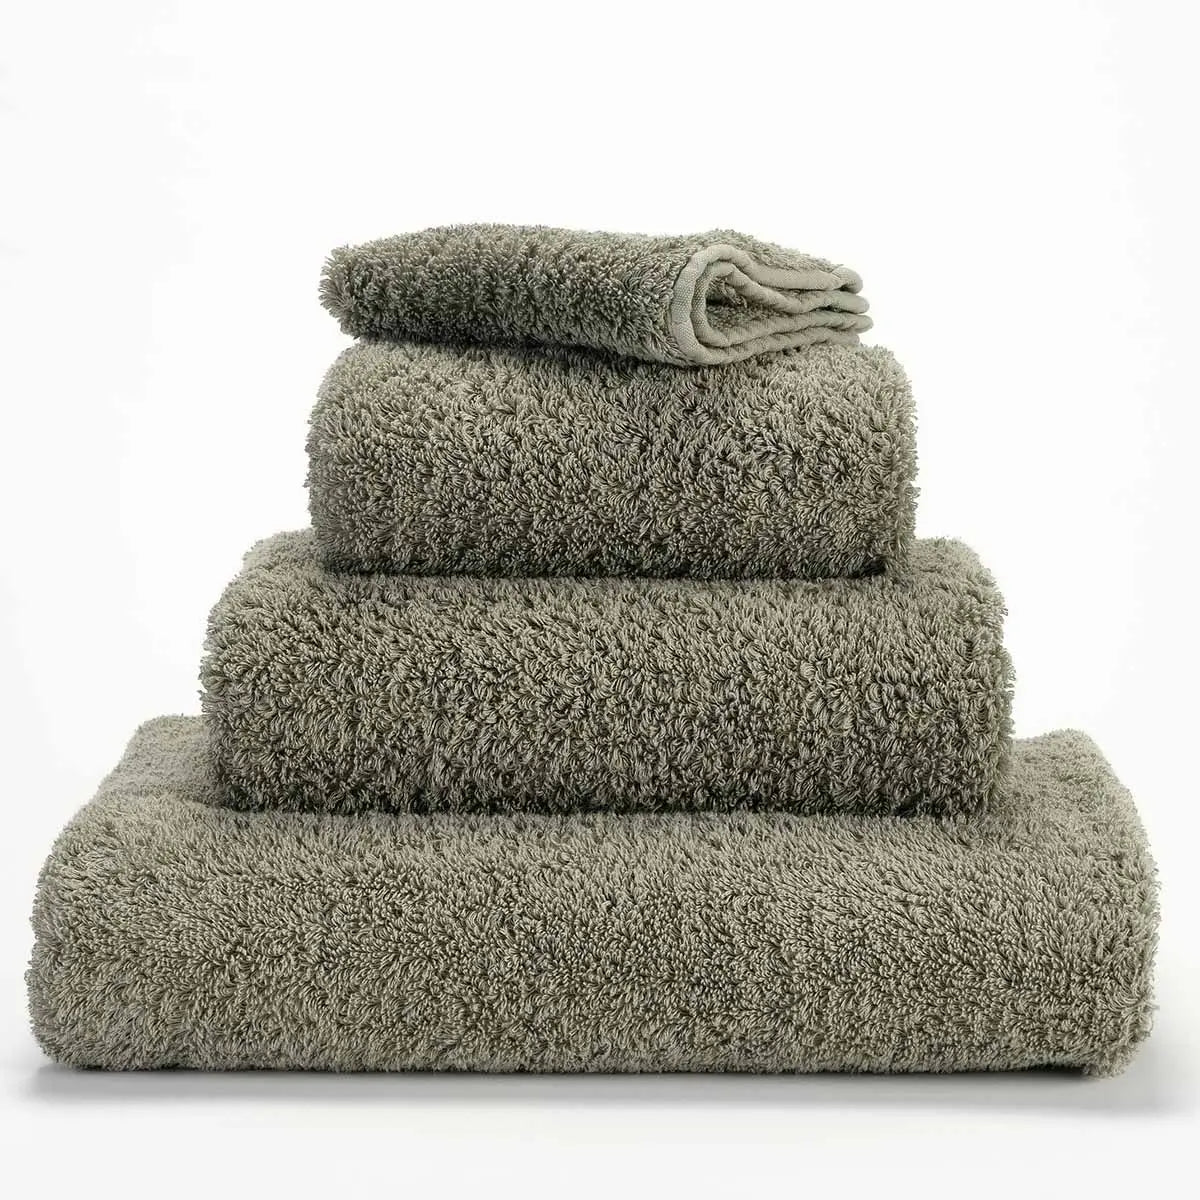 Abyss Super Pile Stack of Towels in Laurel